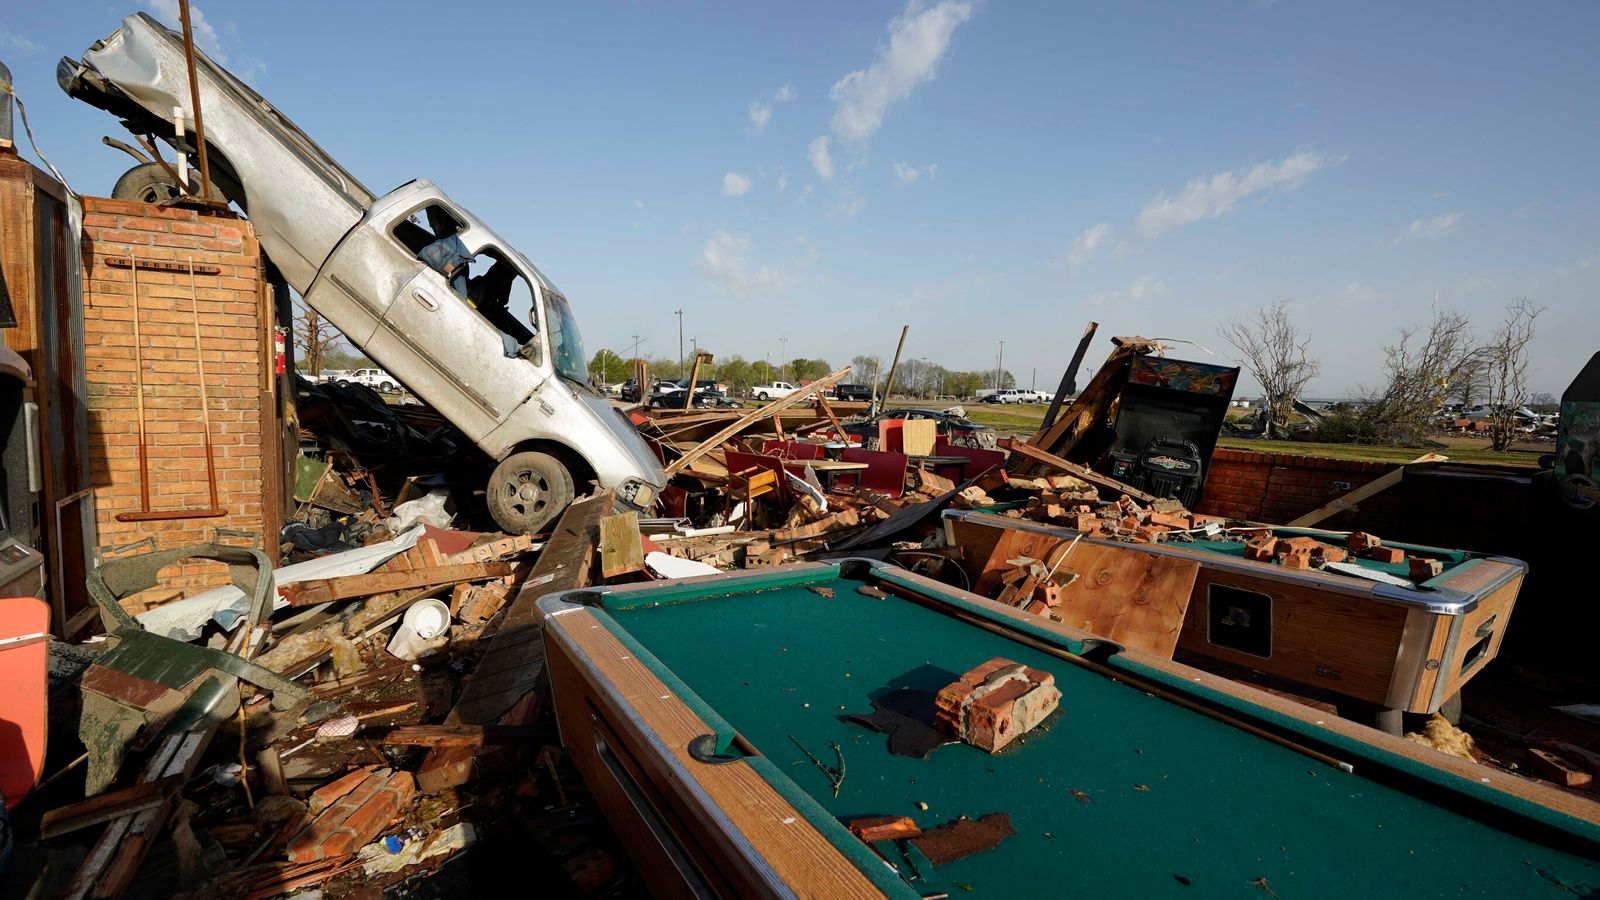 Tornado kills at least 26 as it tears through southern US states during 'supercell' storms